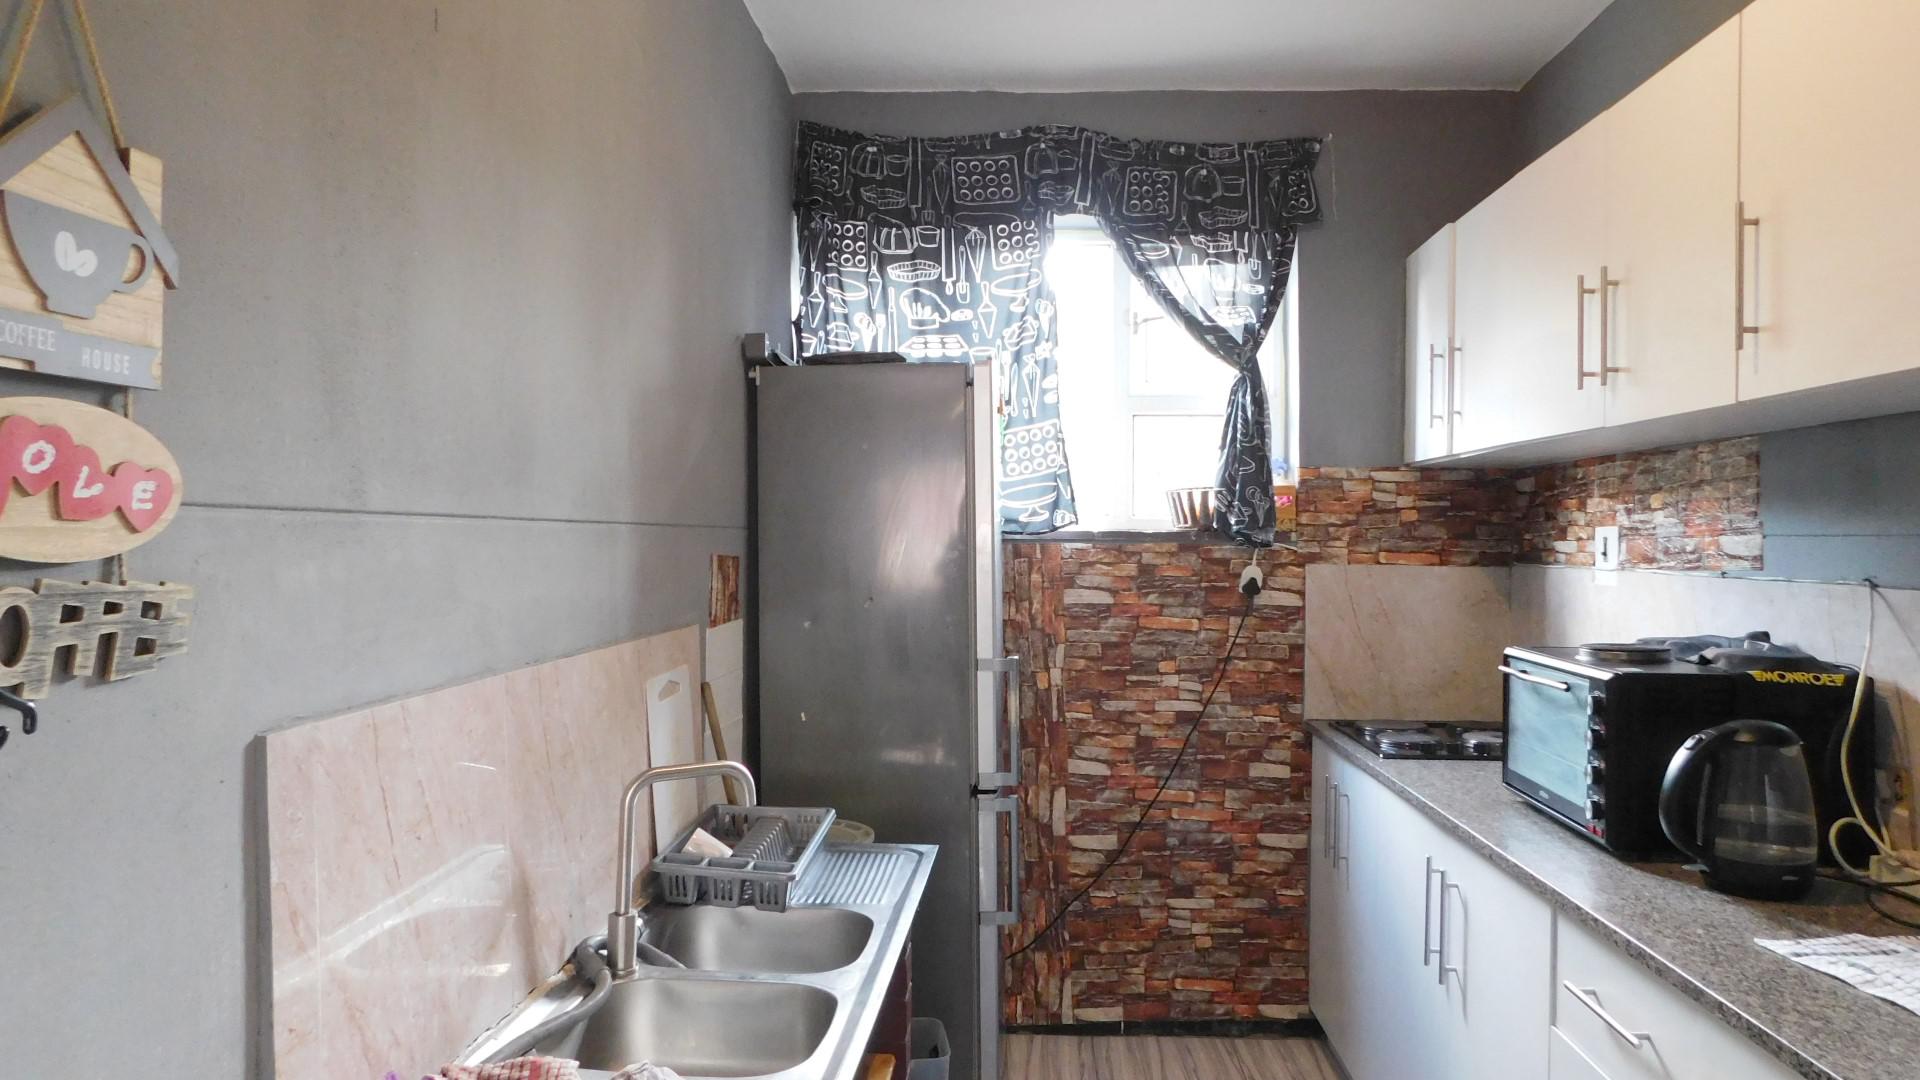 Kitchen - 10 square meters of property in Bluff